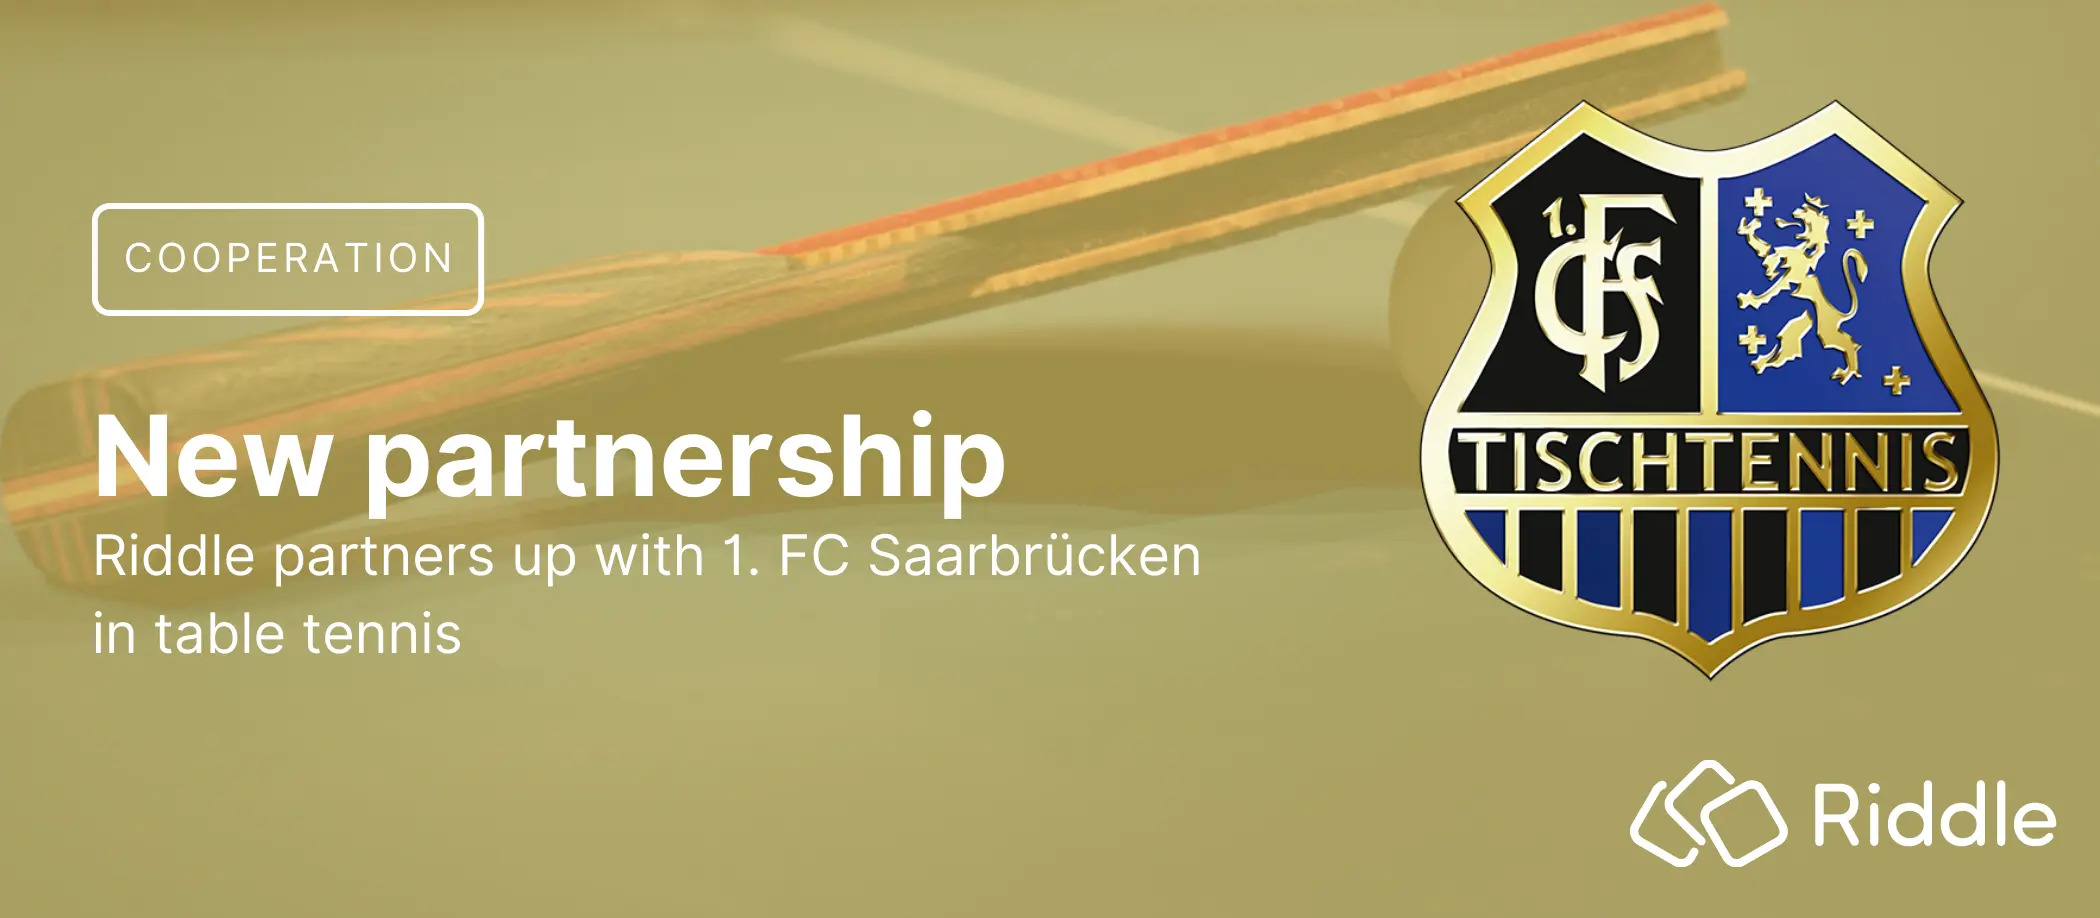 Header for Press Release on the new partnership between Riddle and the 1. FC Saarbrücken Table Tennis